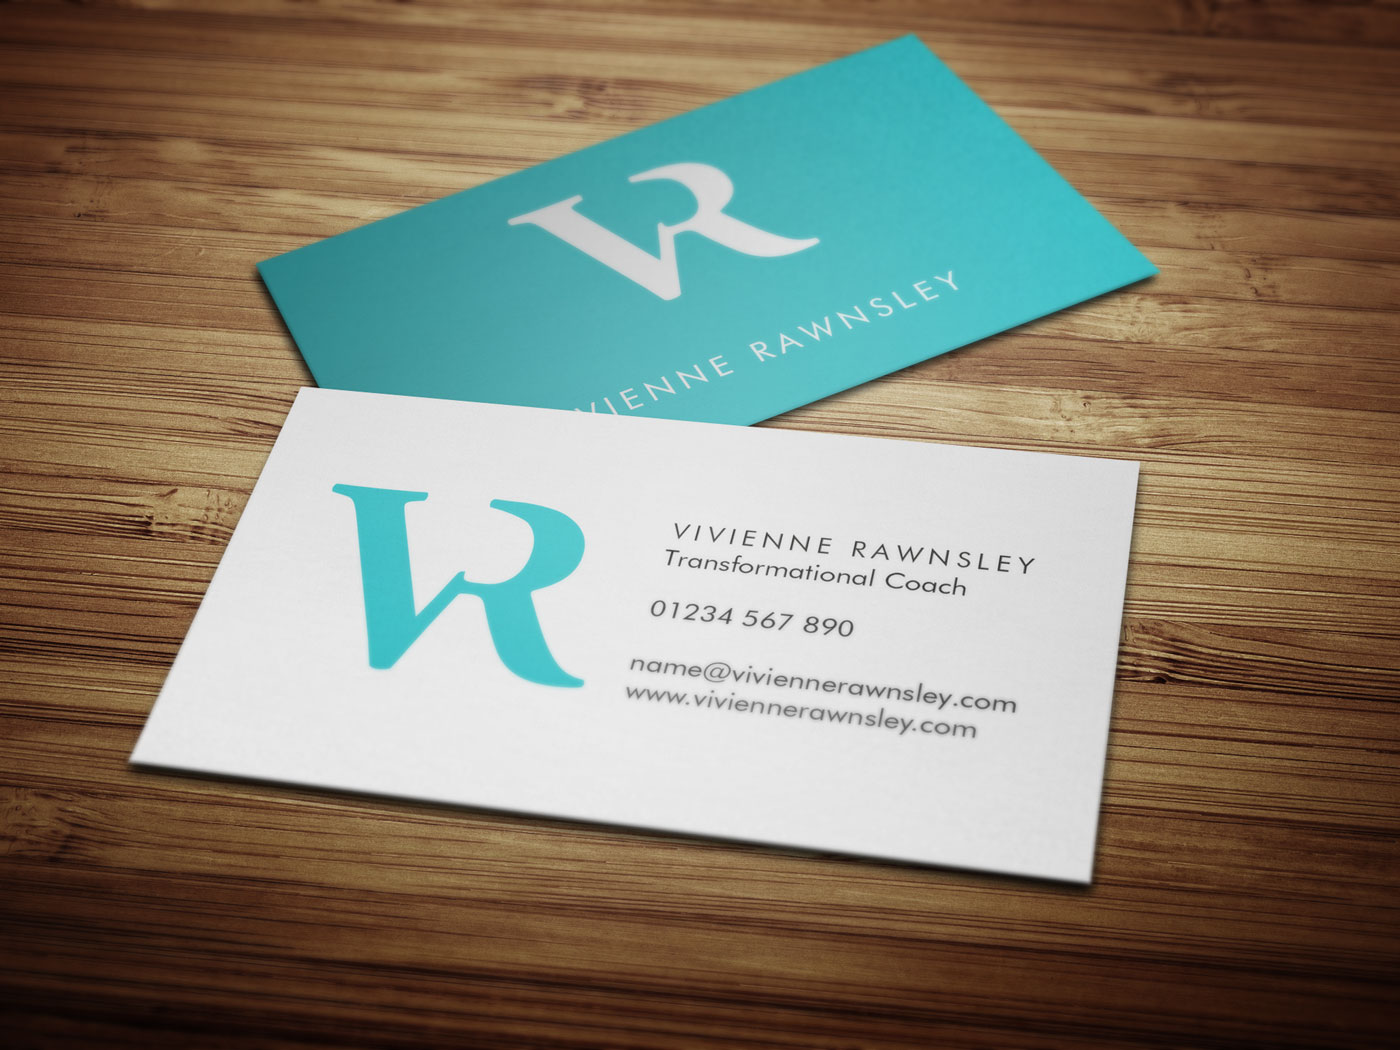 Vivienne Rawnsley Business Cards by Hive of Many